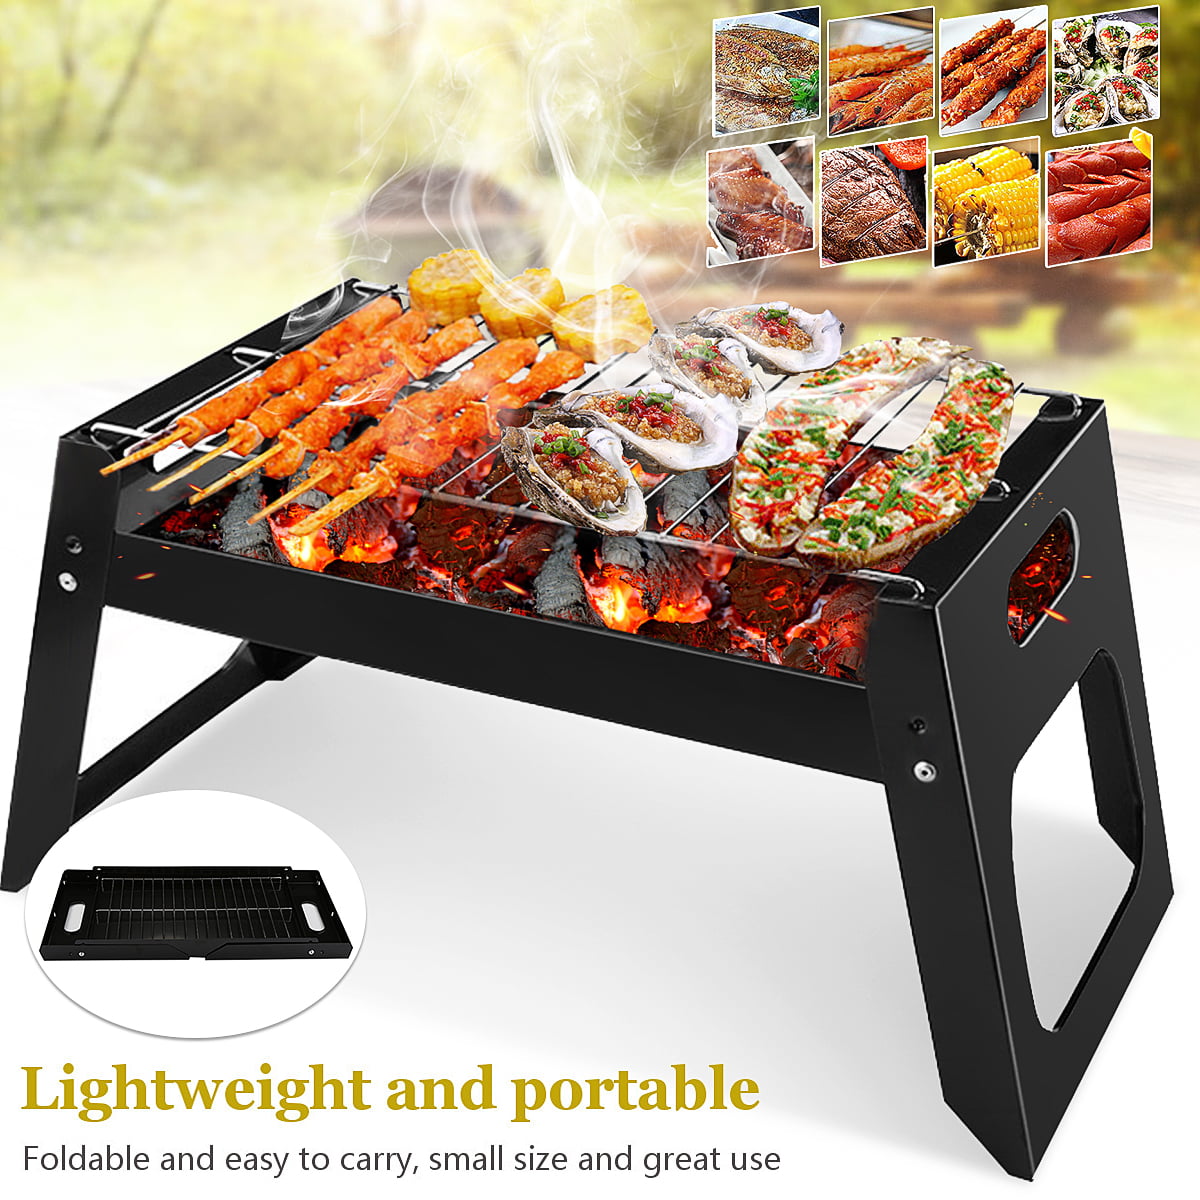 Portable Outdoor Camping FOLDING BARBECUE GRILL BBQ Cooking Stove Utensils 